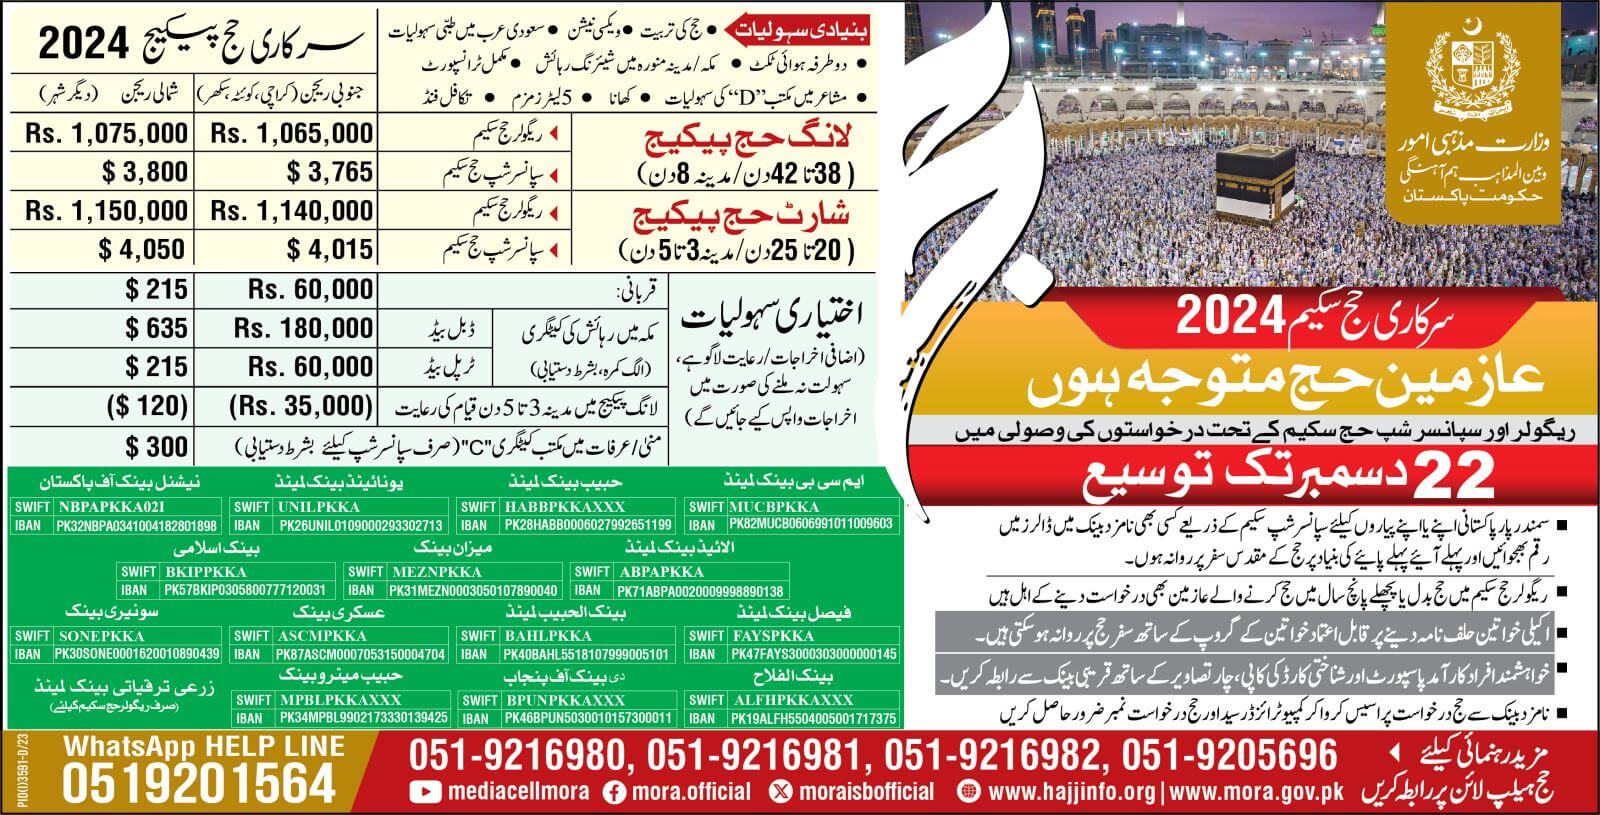 LAST DATE FOR HAJJ 2024 GOVERNMENT SCHEME EXTENDED TO 22ND DECEMBER